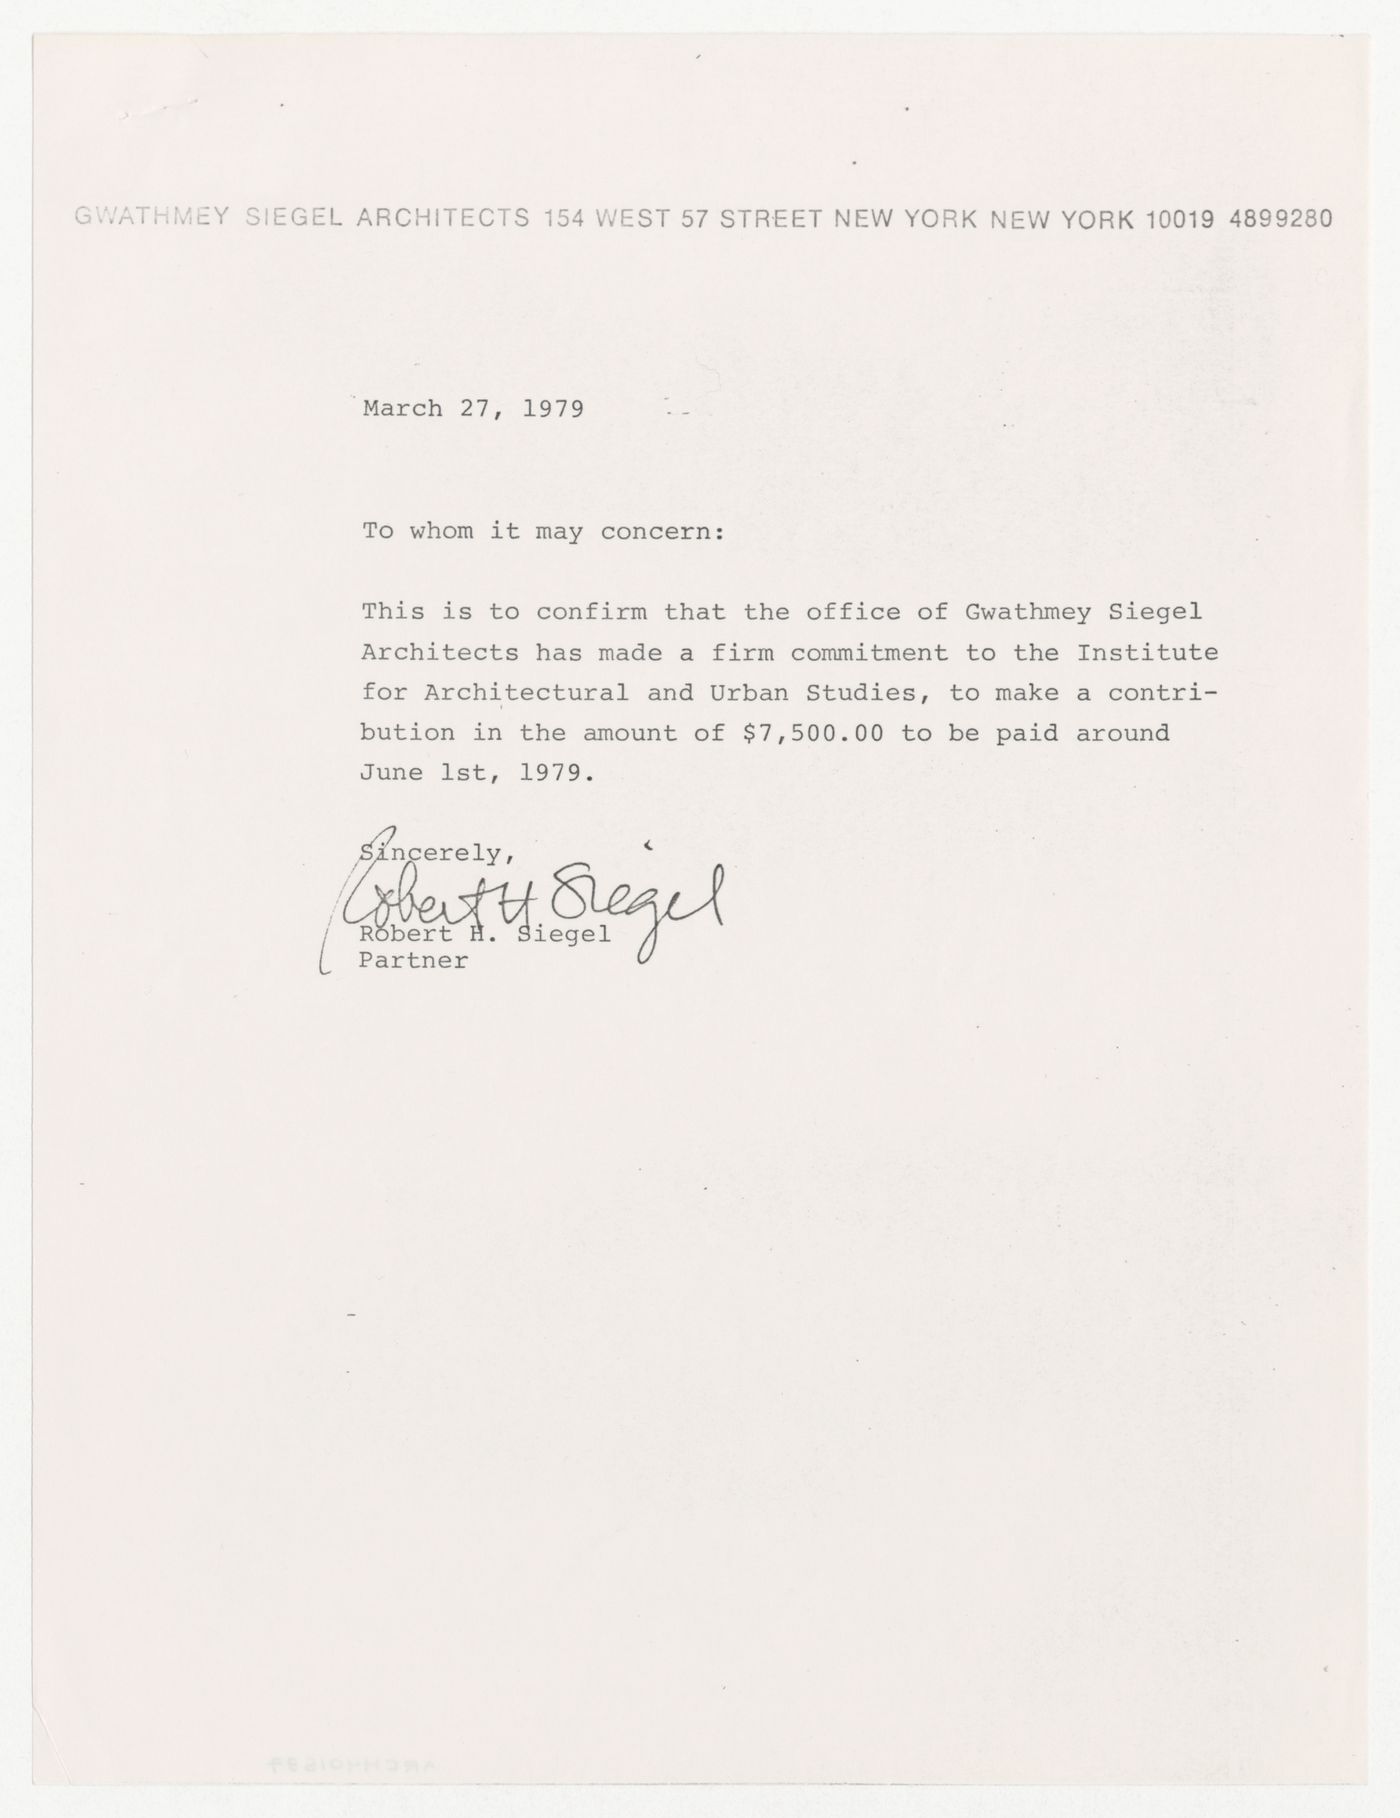 Letter from Robert H. Siegel about donation to IAUS by Gwathmey Siegel Architects